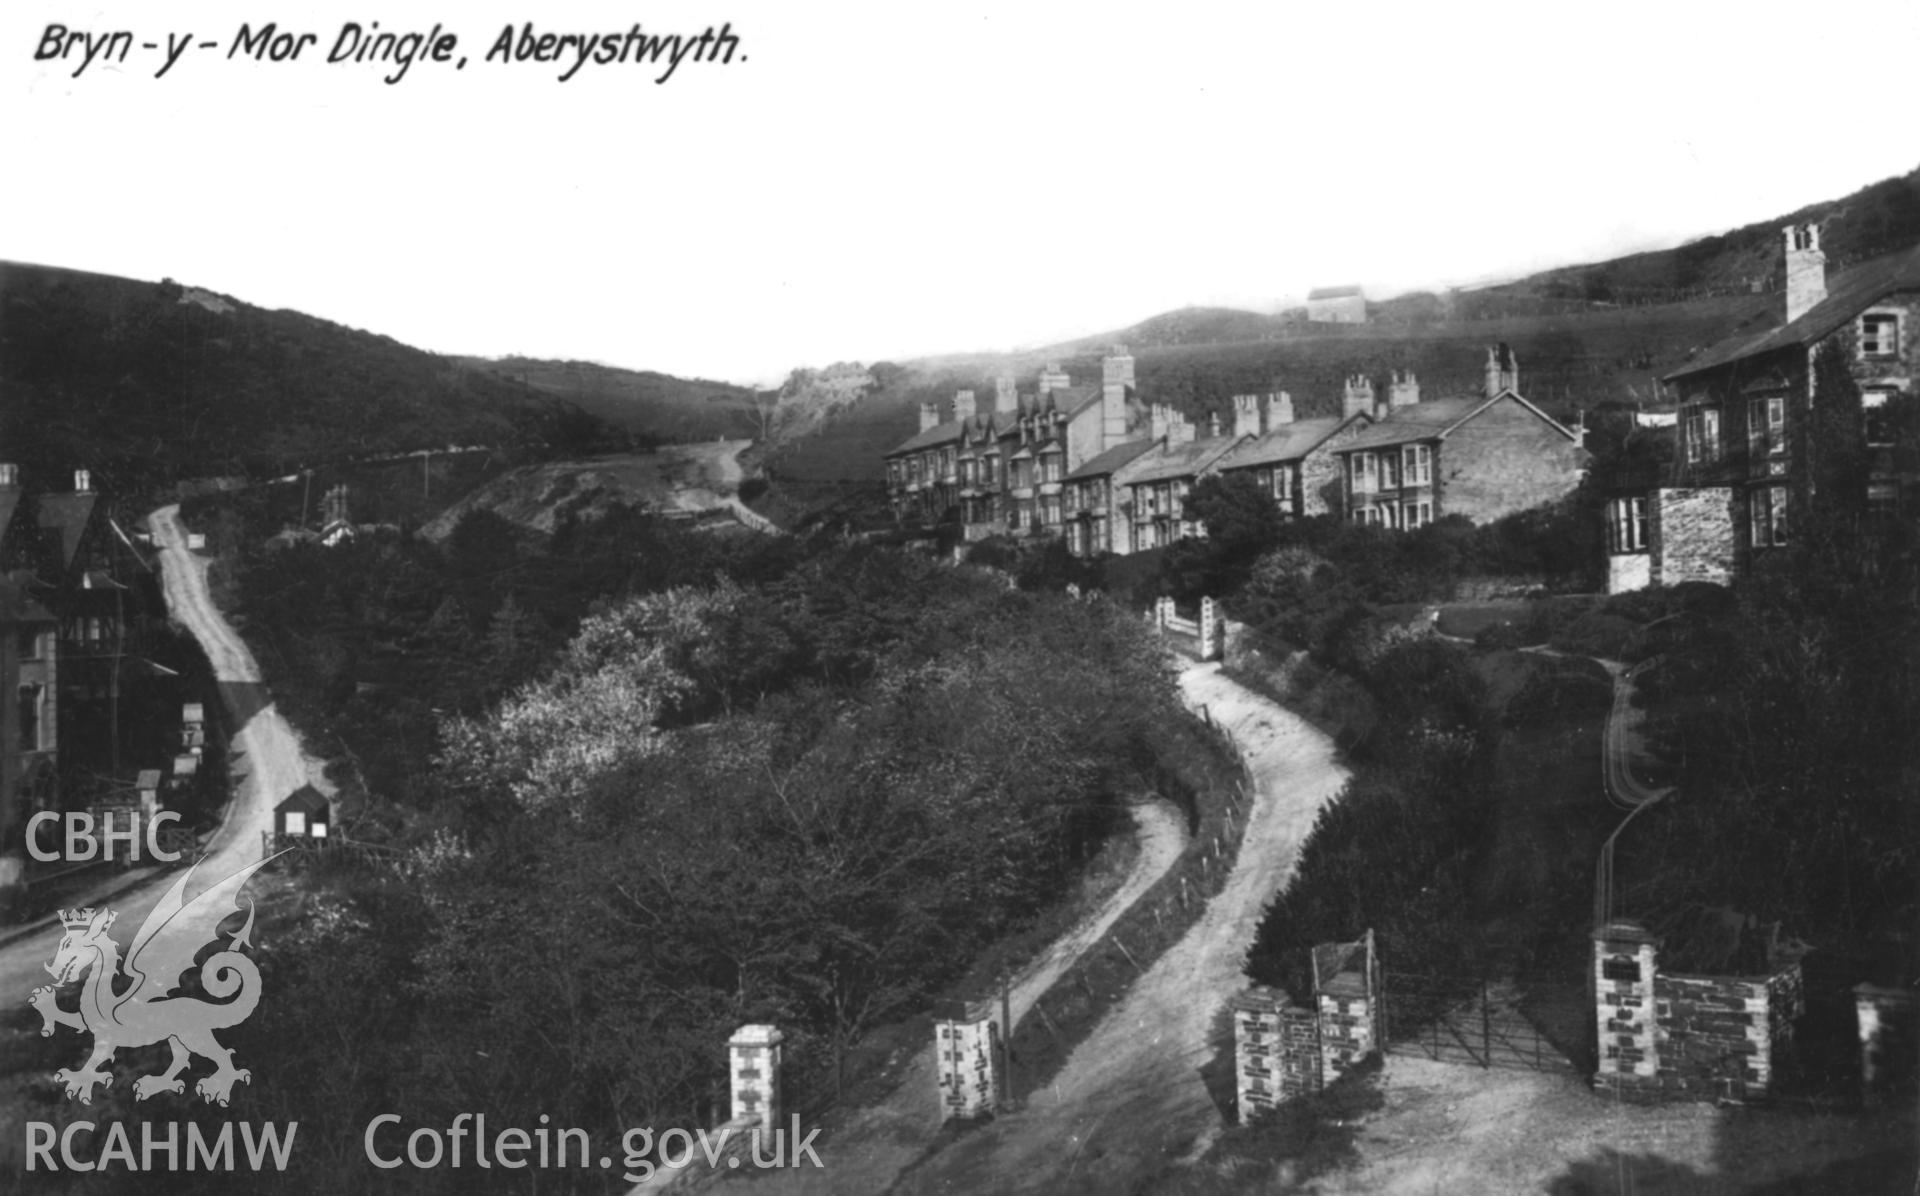 Digital copy of postcard showing Bryn-y-Mor Dingle, Aberystwyth, dated 1928.  Loaned for copying by Charlie Downes